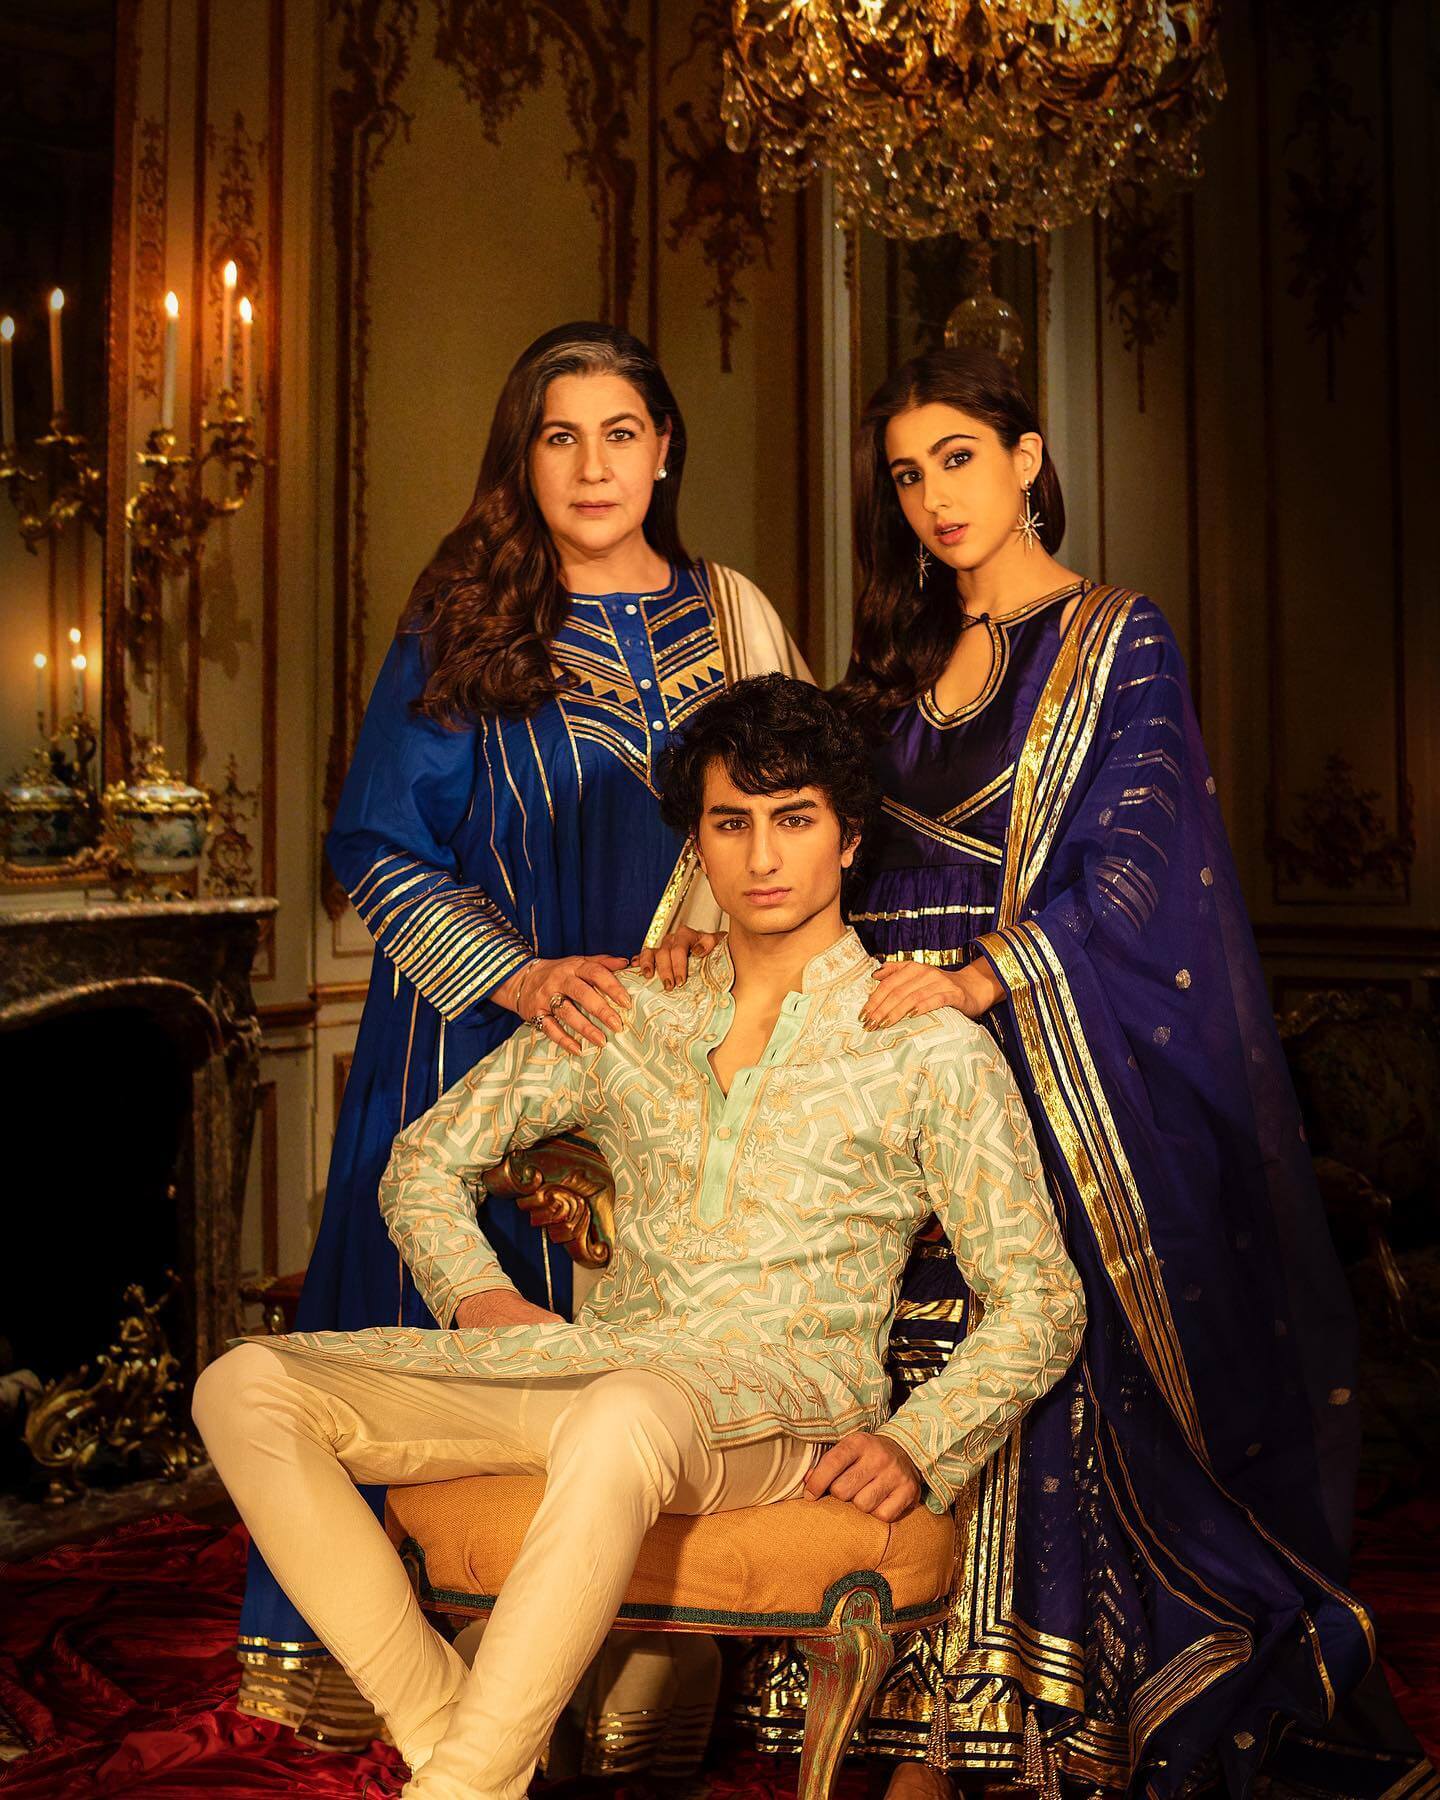 Sara Ali Khan Along With Her Mother Amrita Singh and Brother Ibrahim in a Royal Look